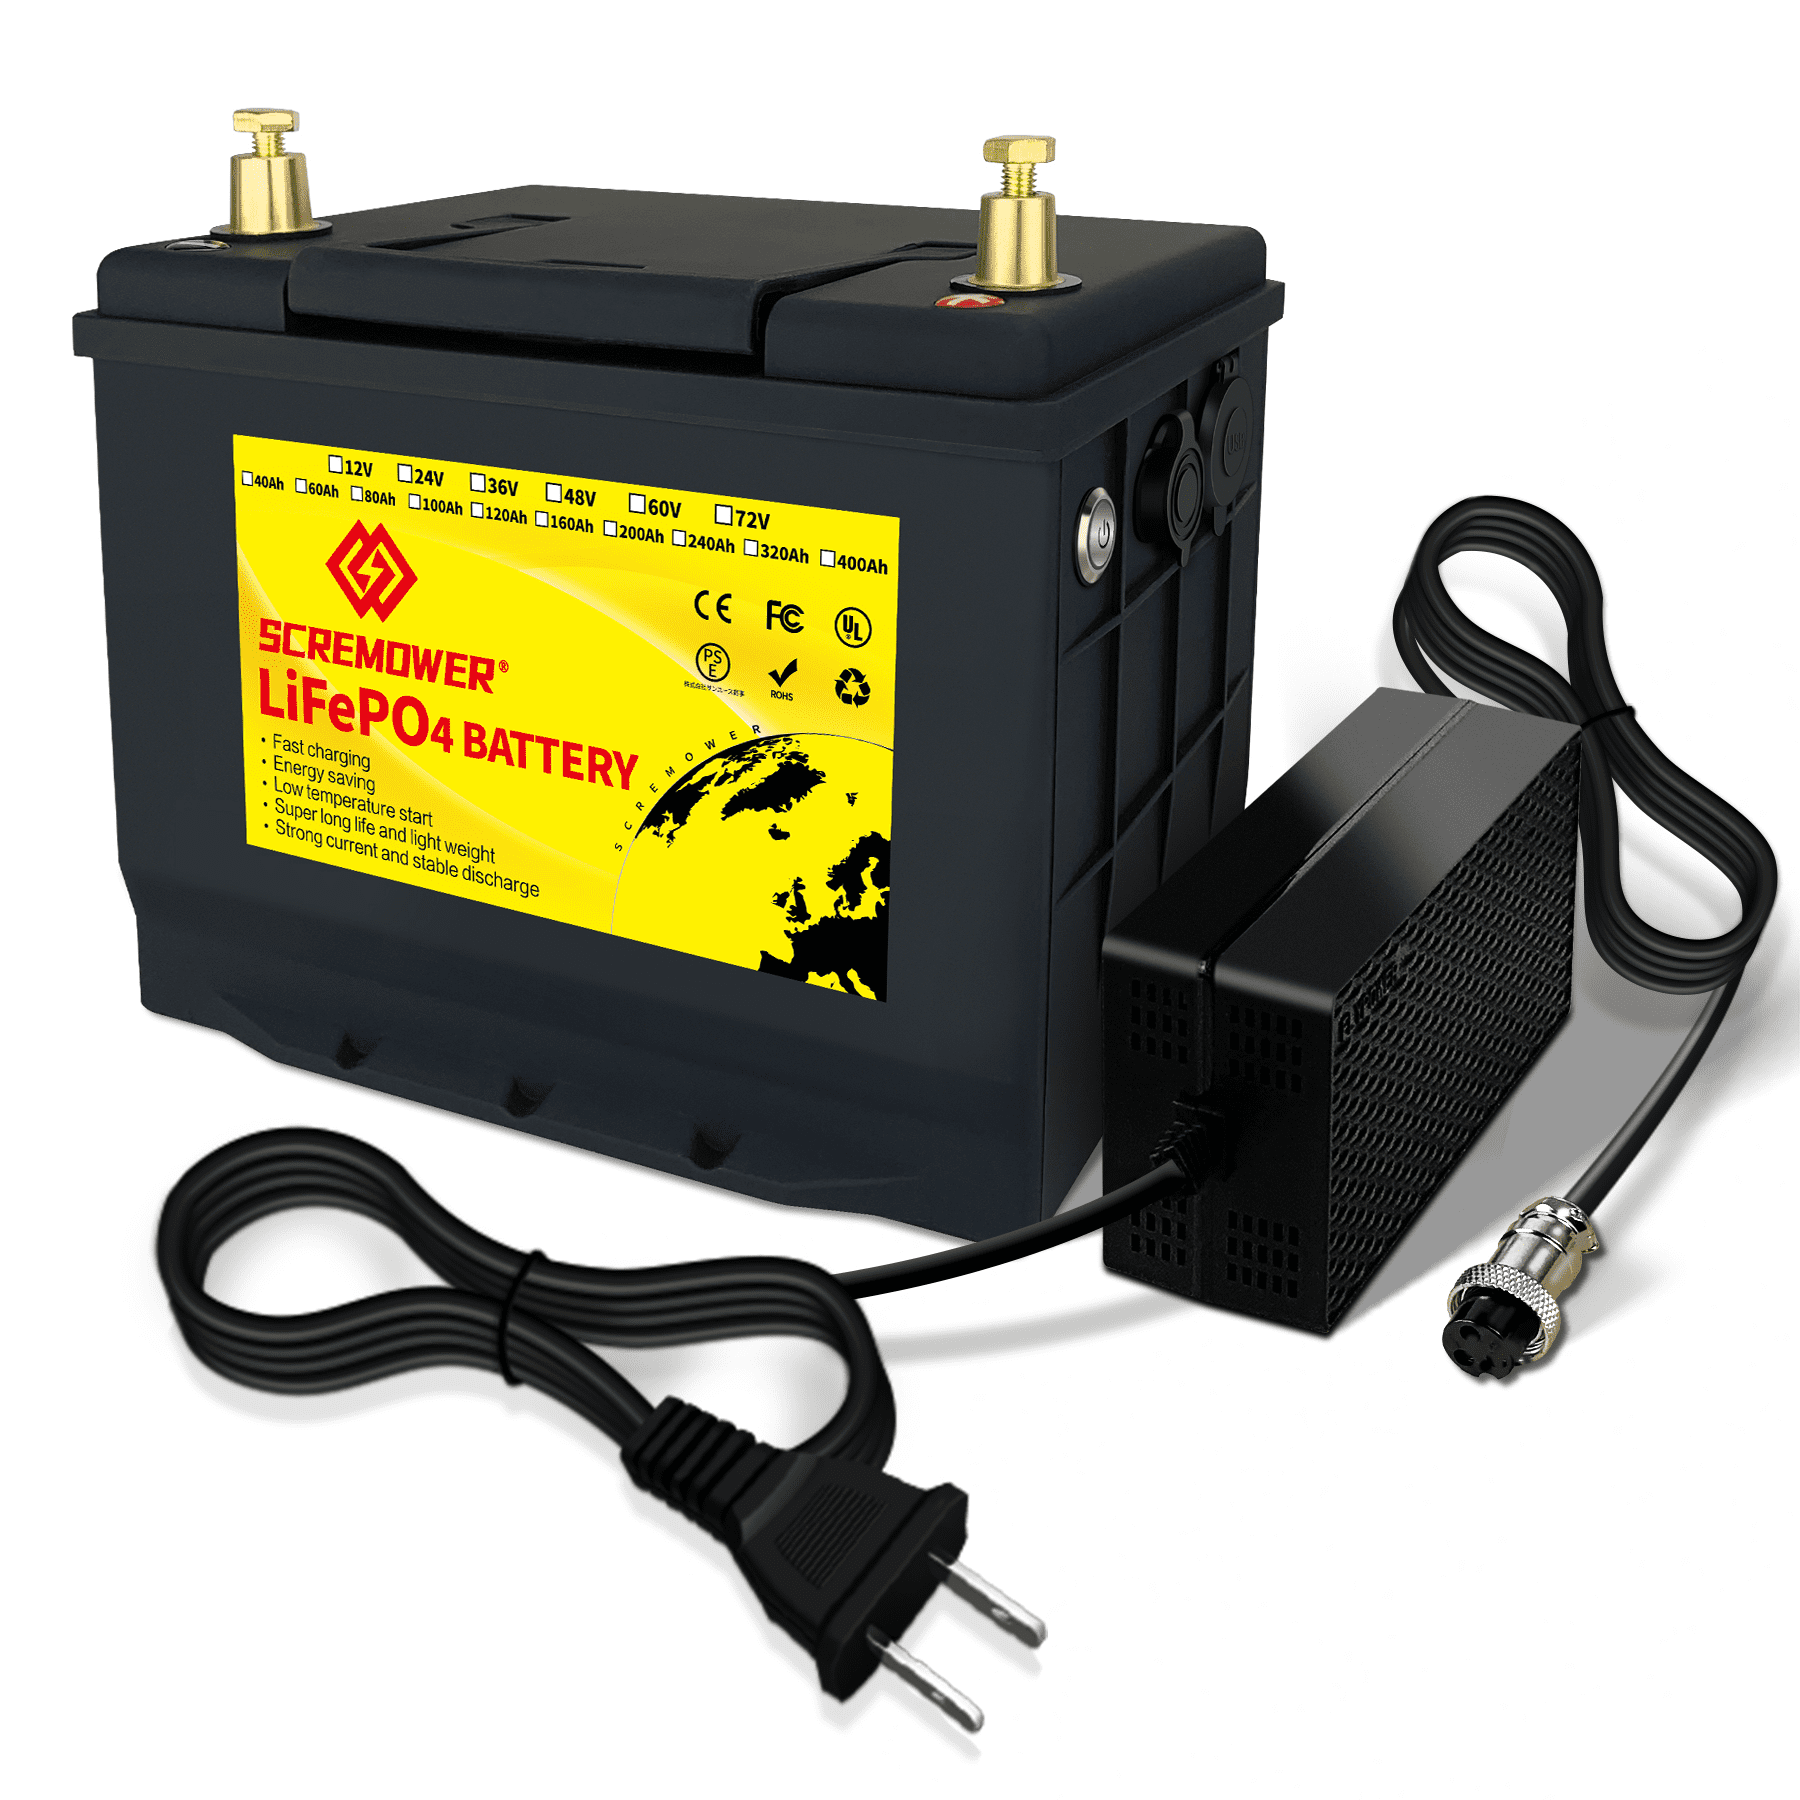 12V LiFePO4 Battery 60Ah, Lithium Batteries with 50A BMS, Rechargeable Deep  Cycle, widely used for Trolling Motor, Marine, Camper, RV, Solar Power